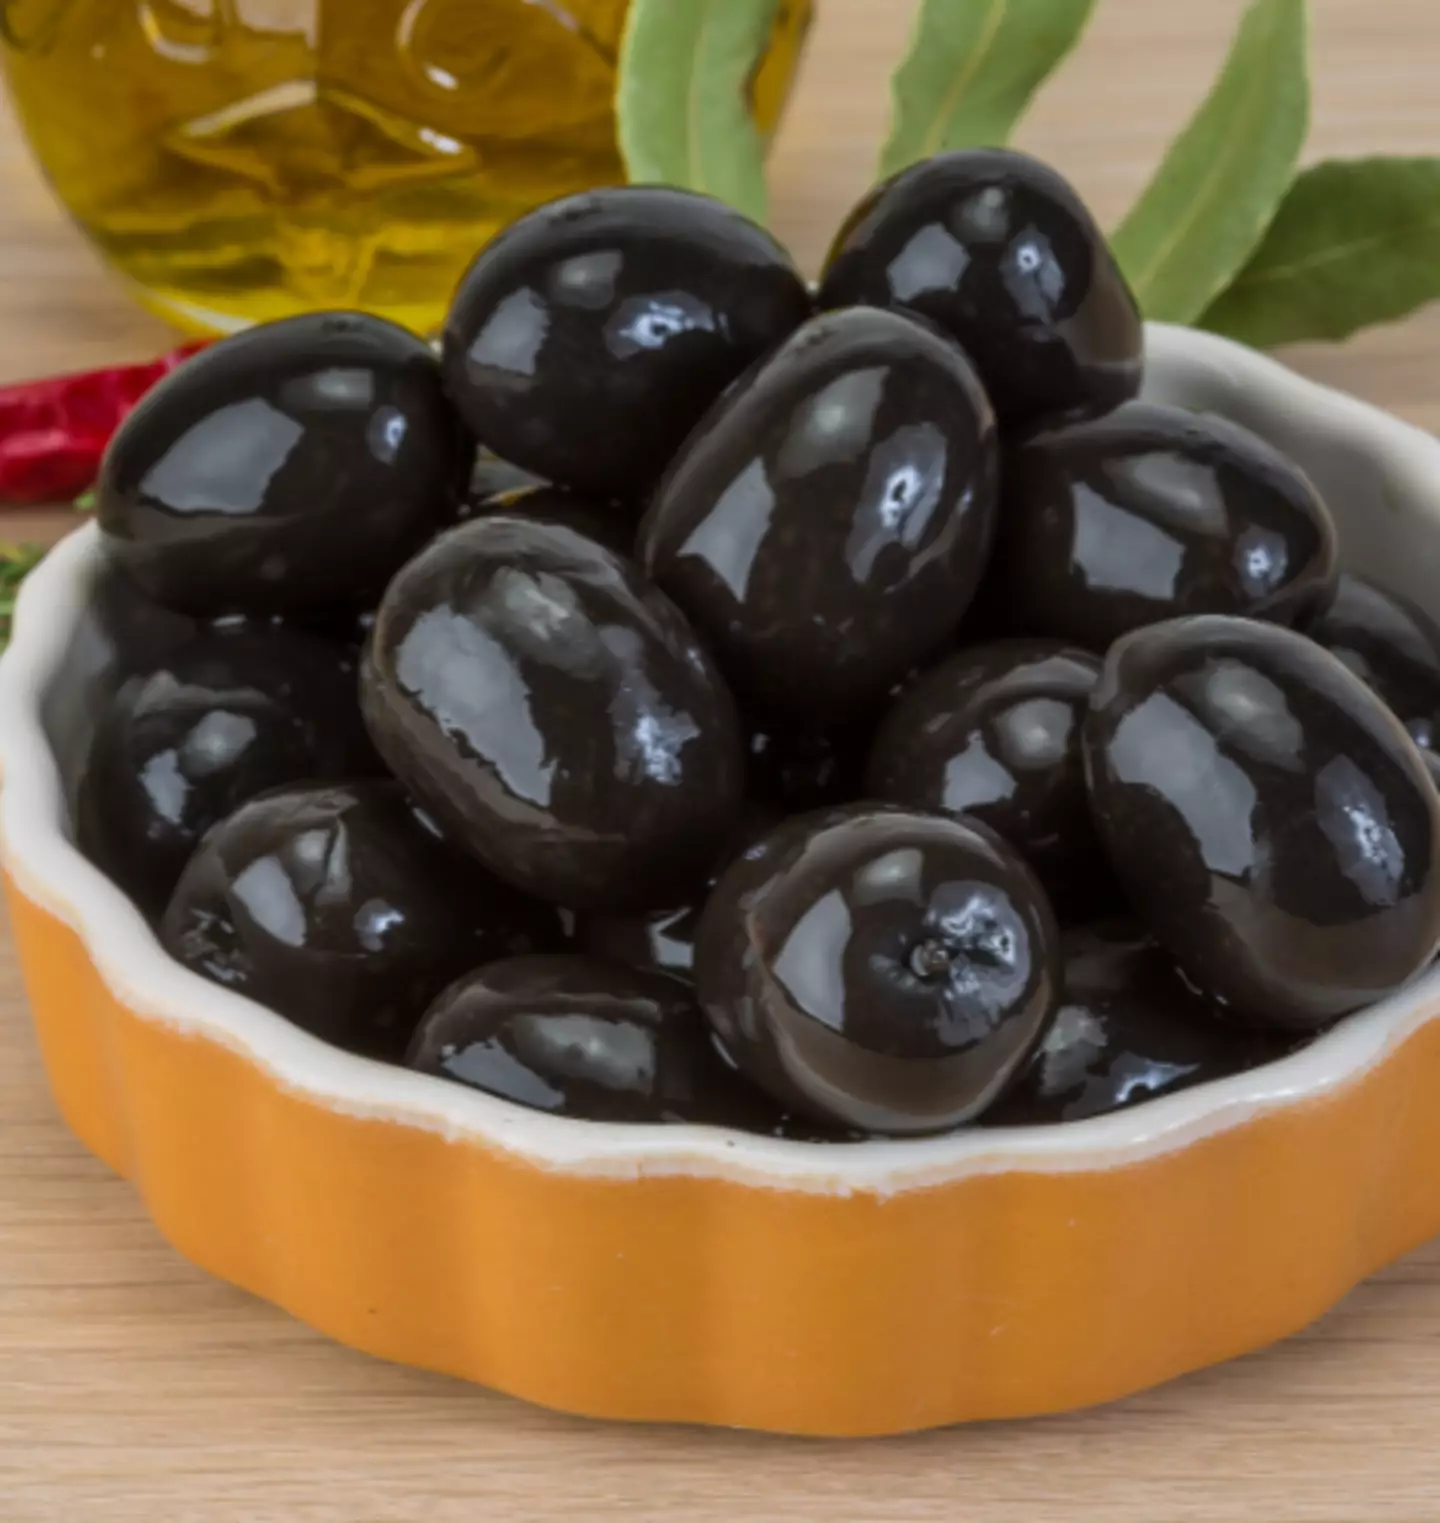 Eating just seven olives a day can be good for you, but there are some downsides too (Getty Stock Images)